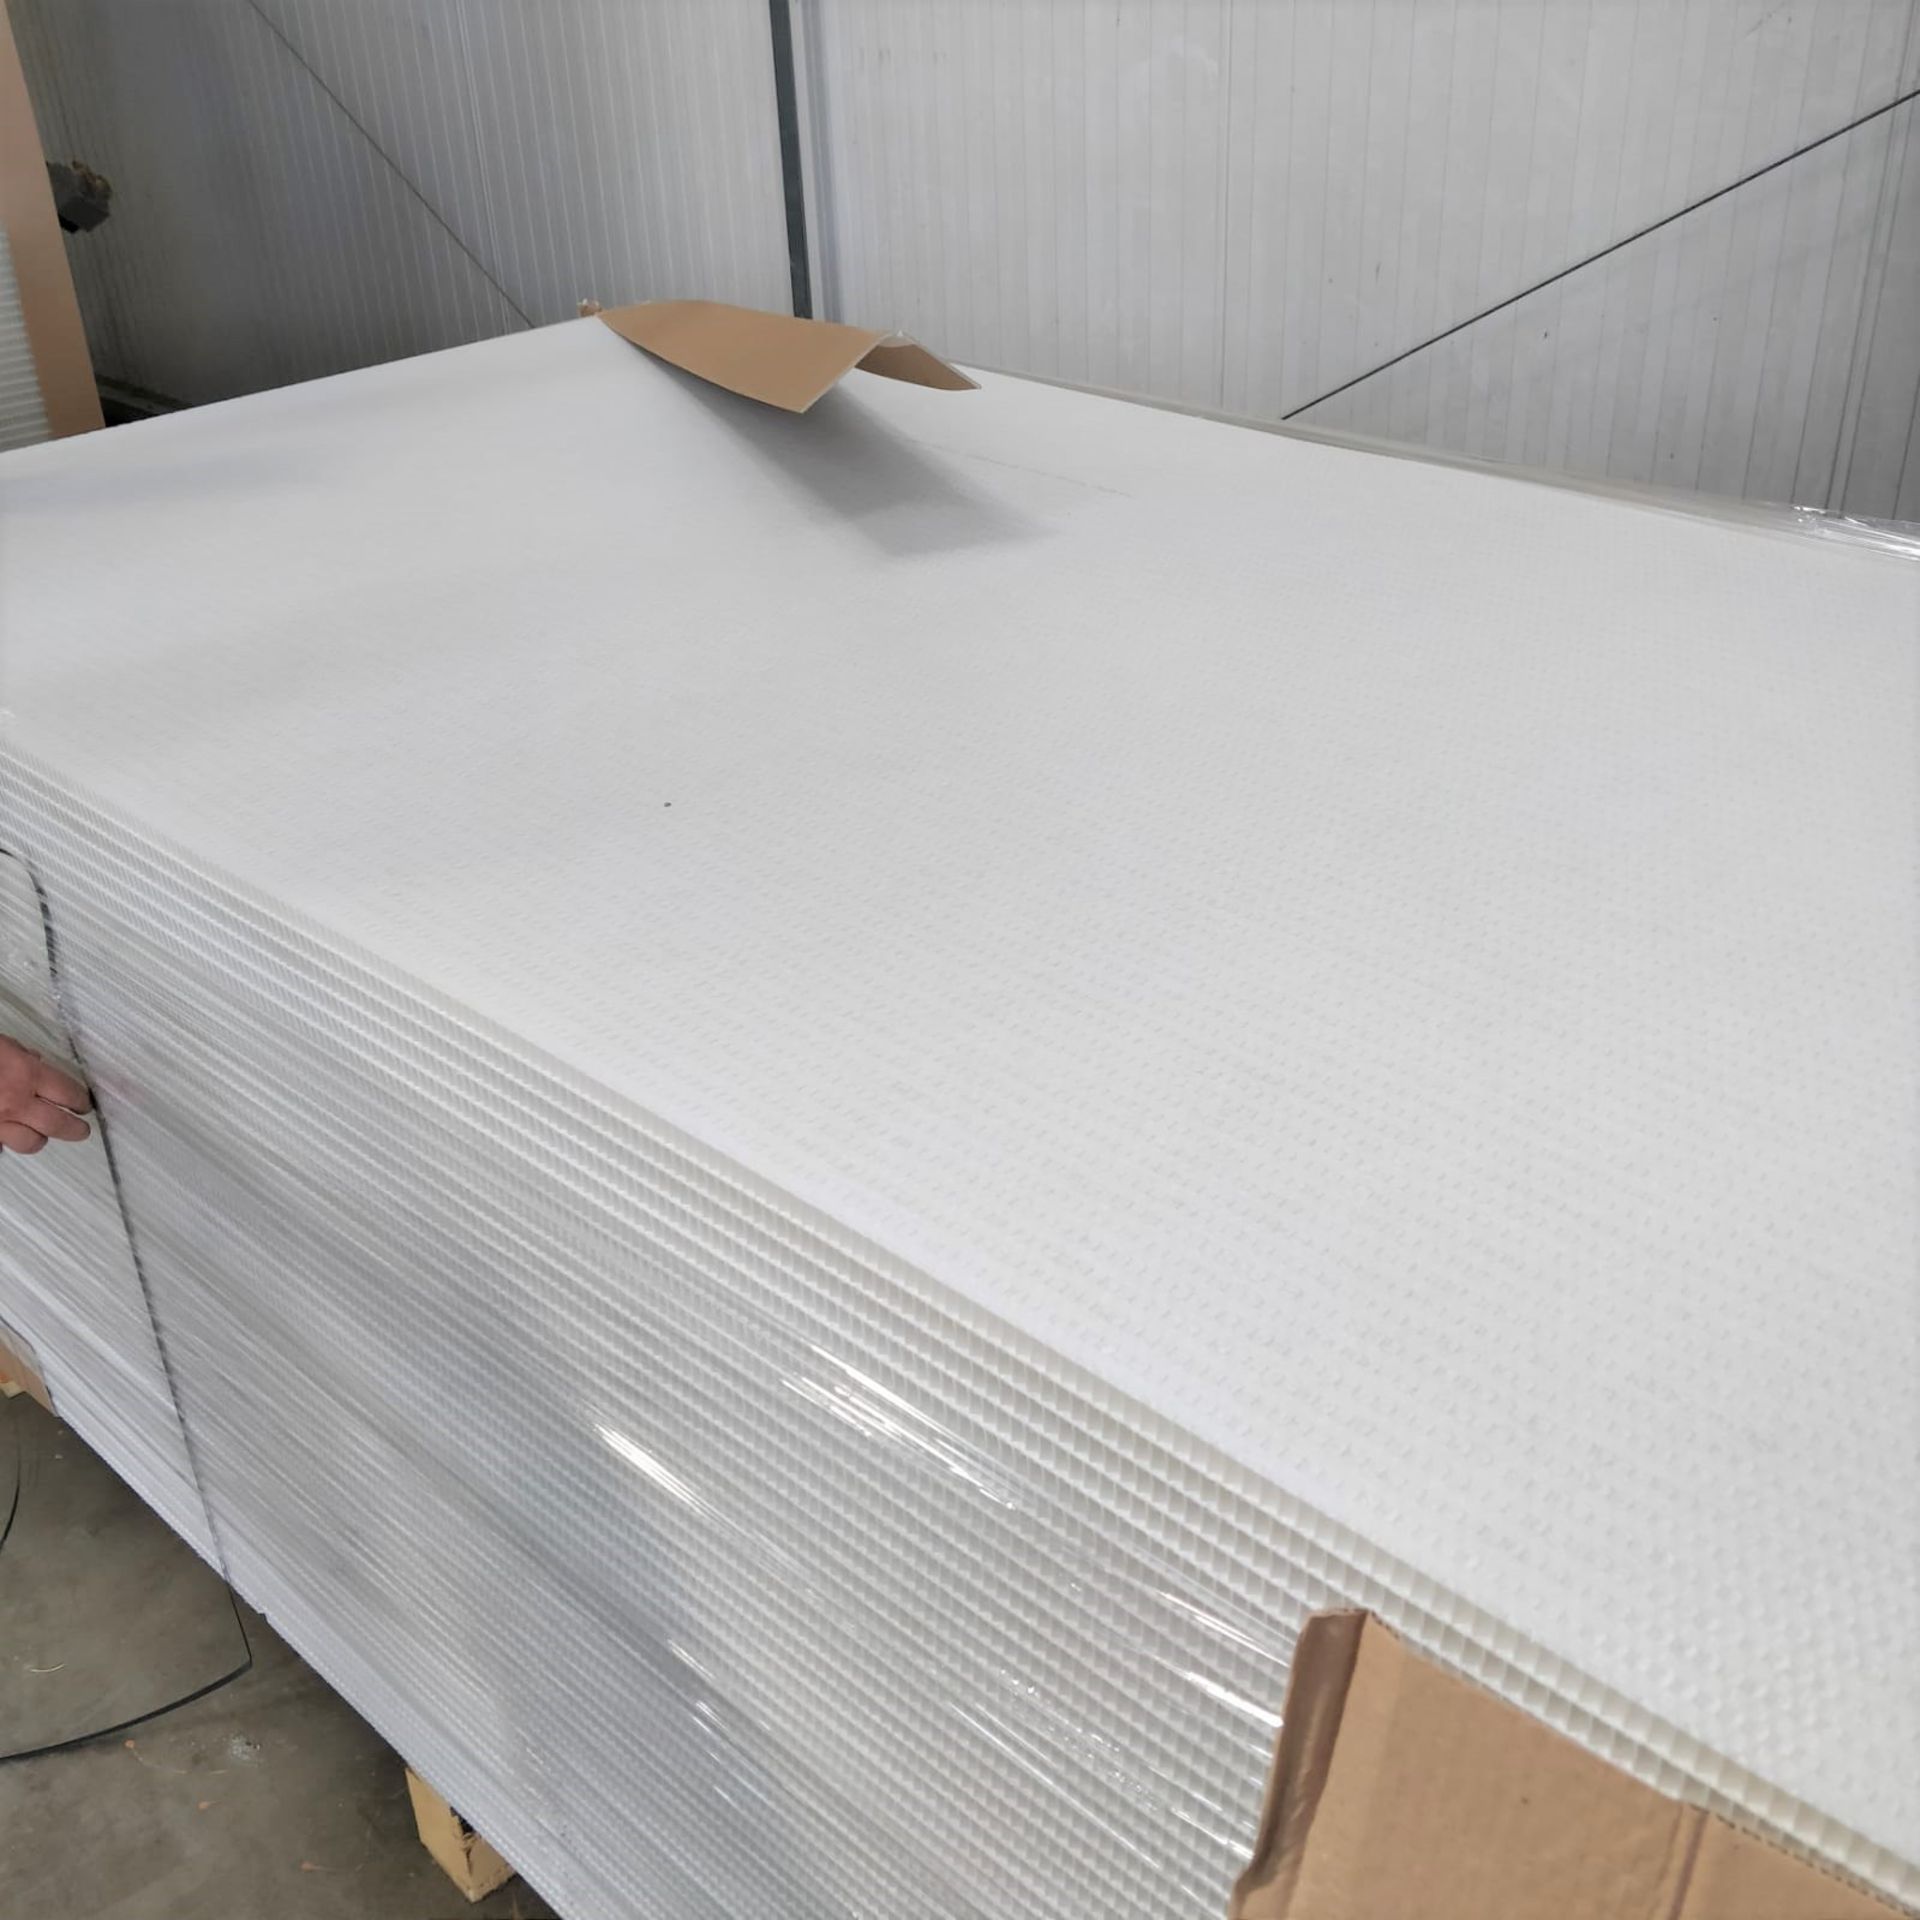 24 x ThermHex Thermoplastic Honeycomb Core Panels - Size 3175 x 1210 x 20mm - New Stock - - Image 7 of 7